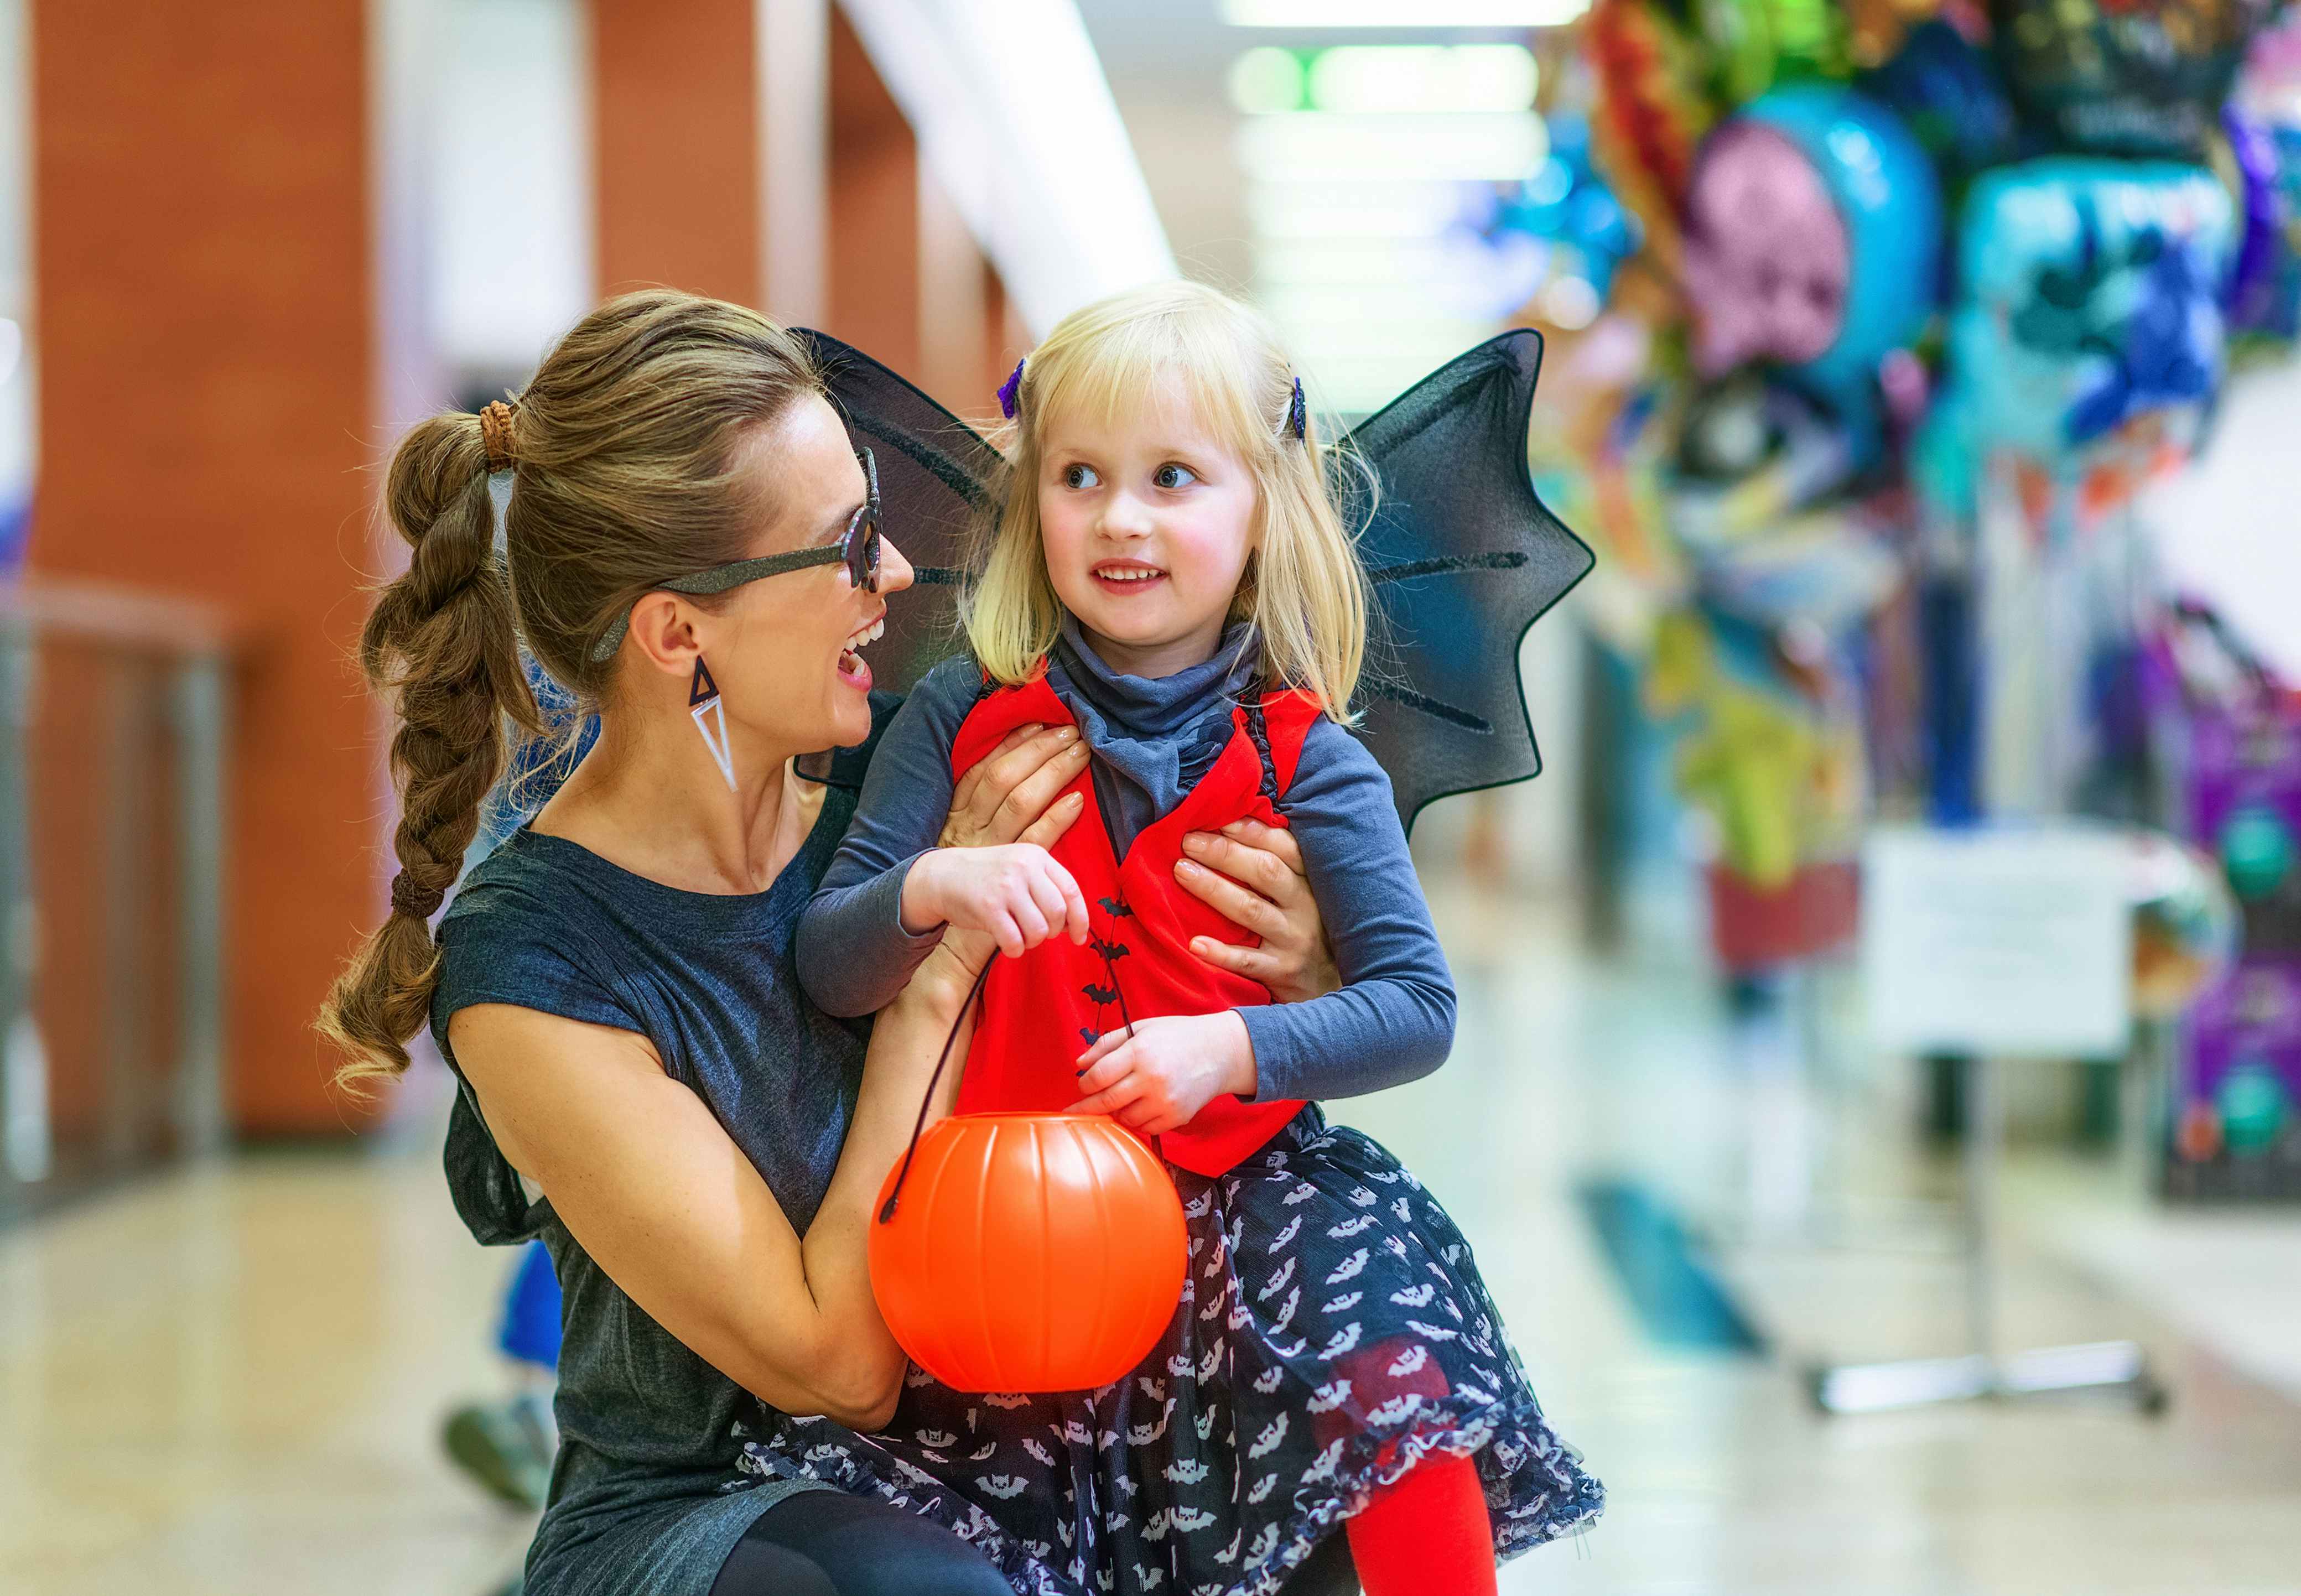 A woman and her daughter dressed in halloween costumes smile at each other, inside a shopping mall.